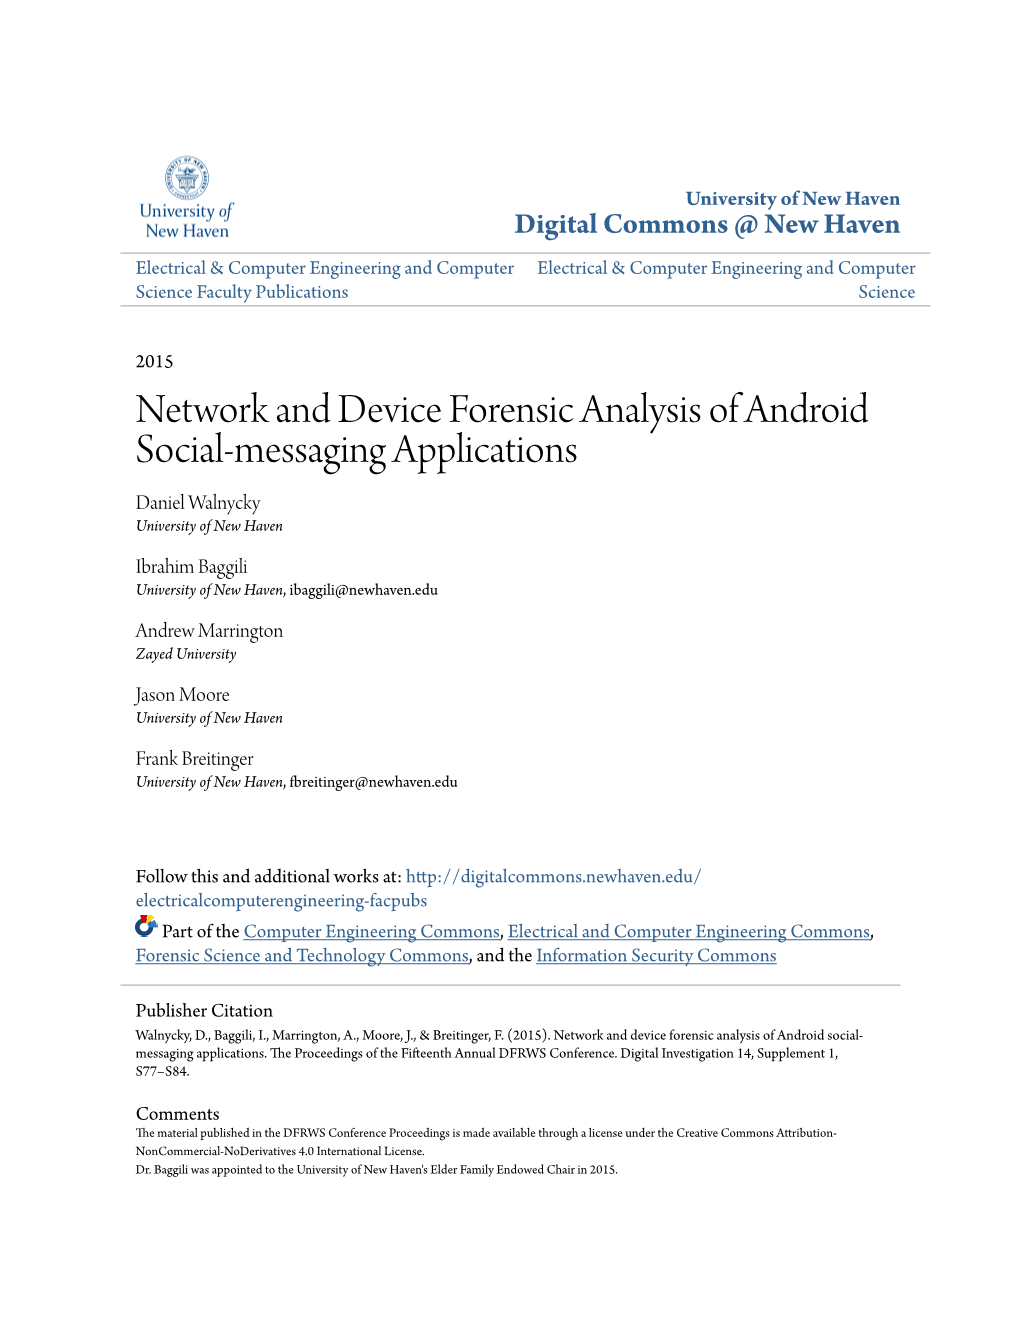 Network and Device Forensic Analysis of Android Social-Messaging Applications Daniel Walnycky University of New Haven